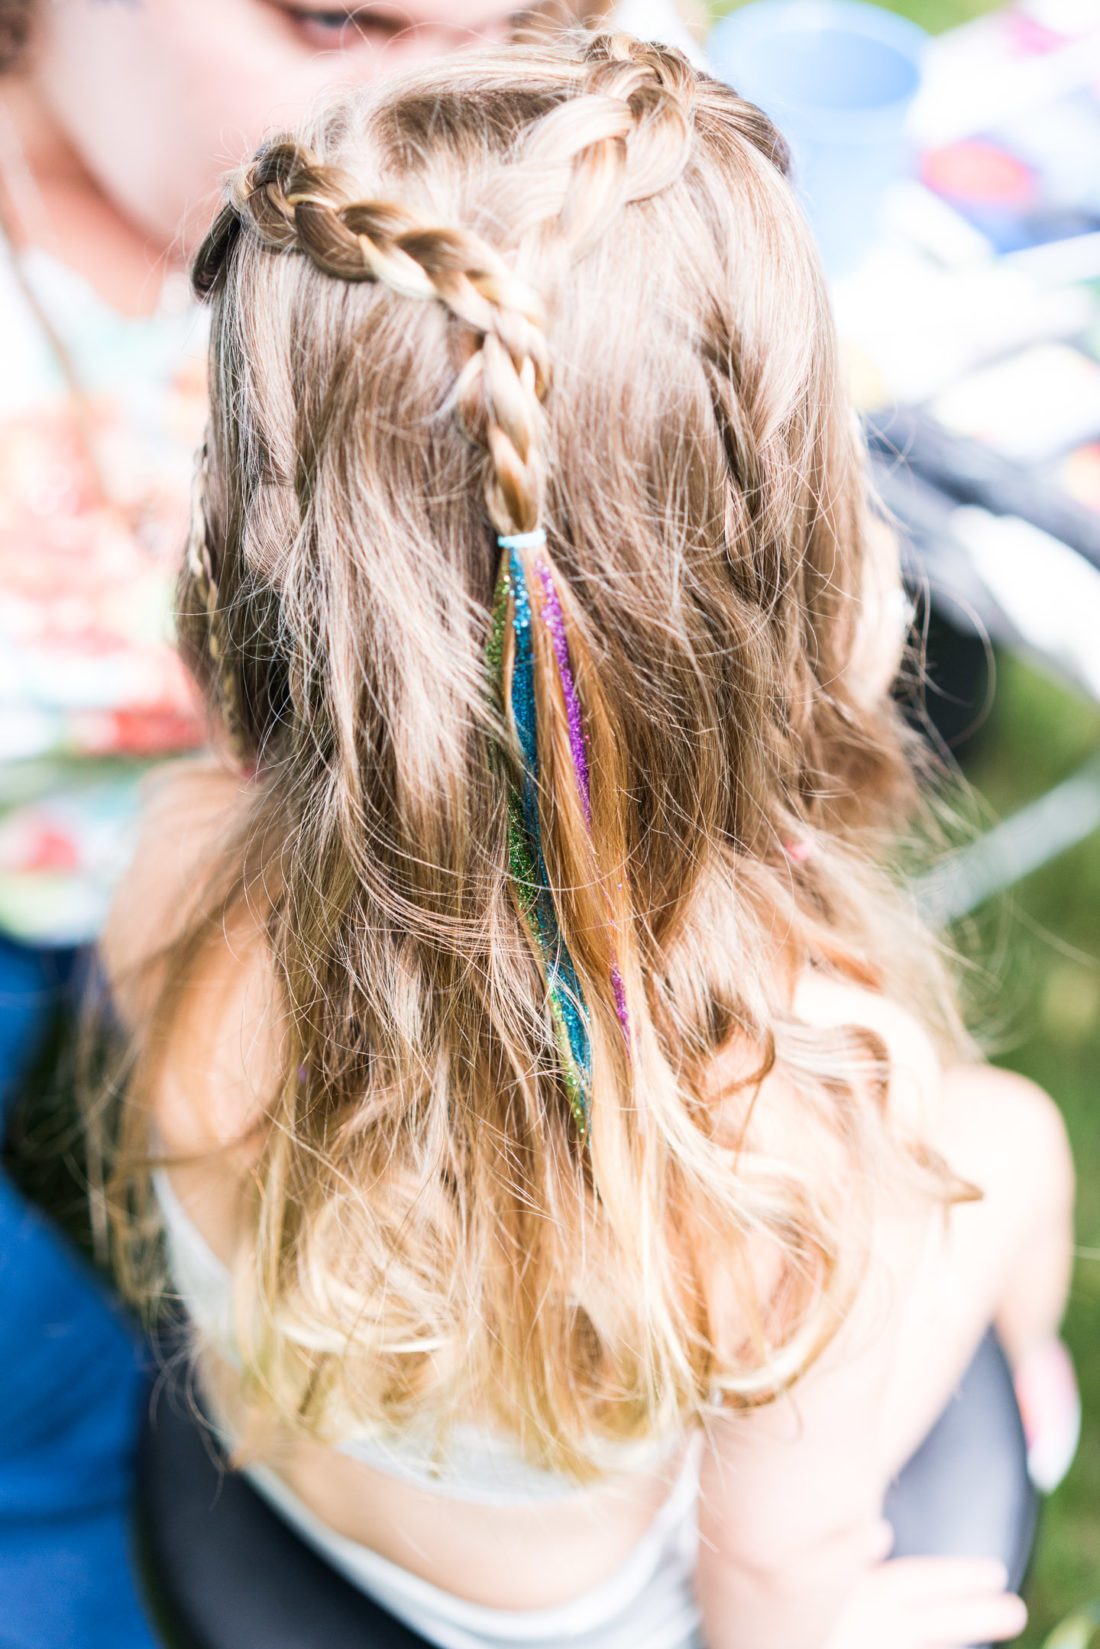 Marlowe Martino gets glitter painted in her hair at the mermaid braid bar at her third birthday party